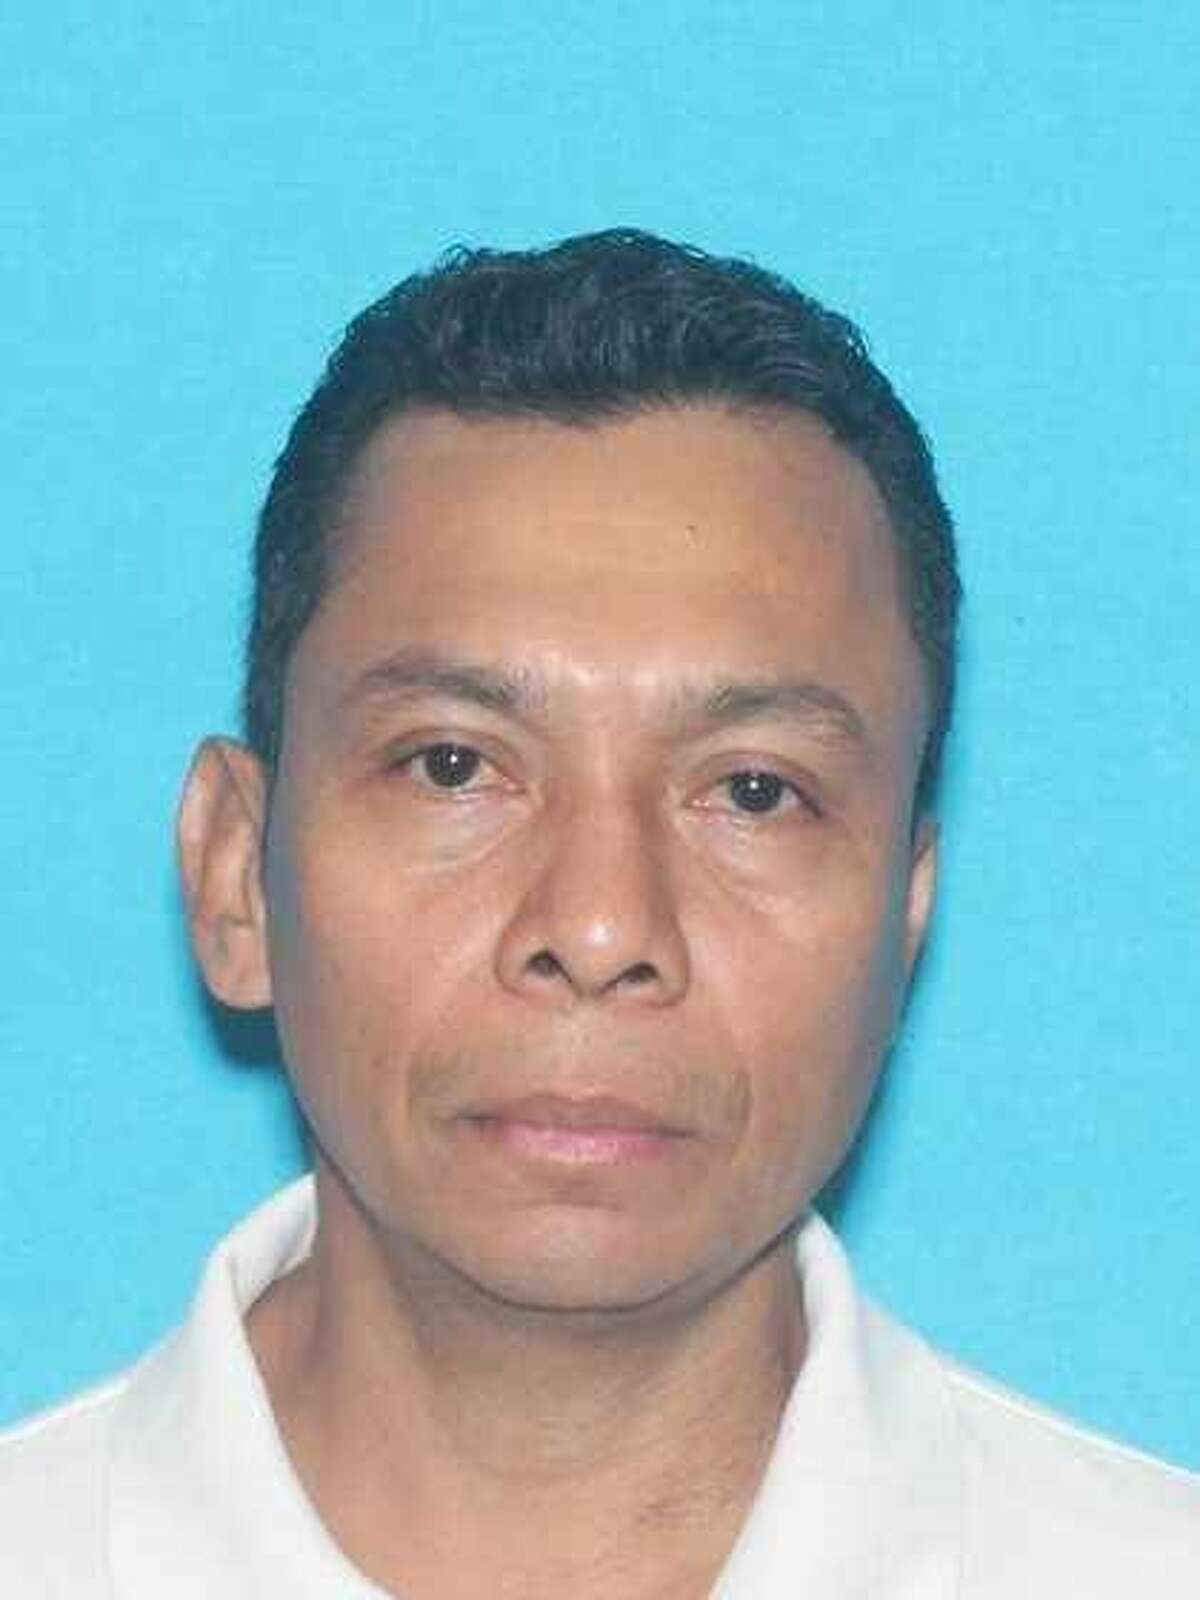 Holman Hernandez is accused of abducting a 3-year-old in Houston.